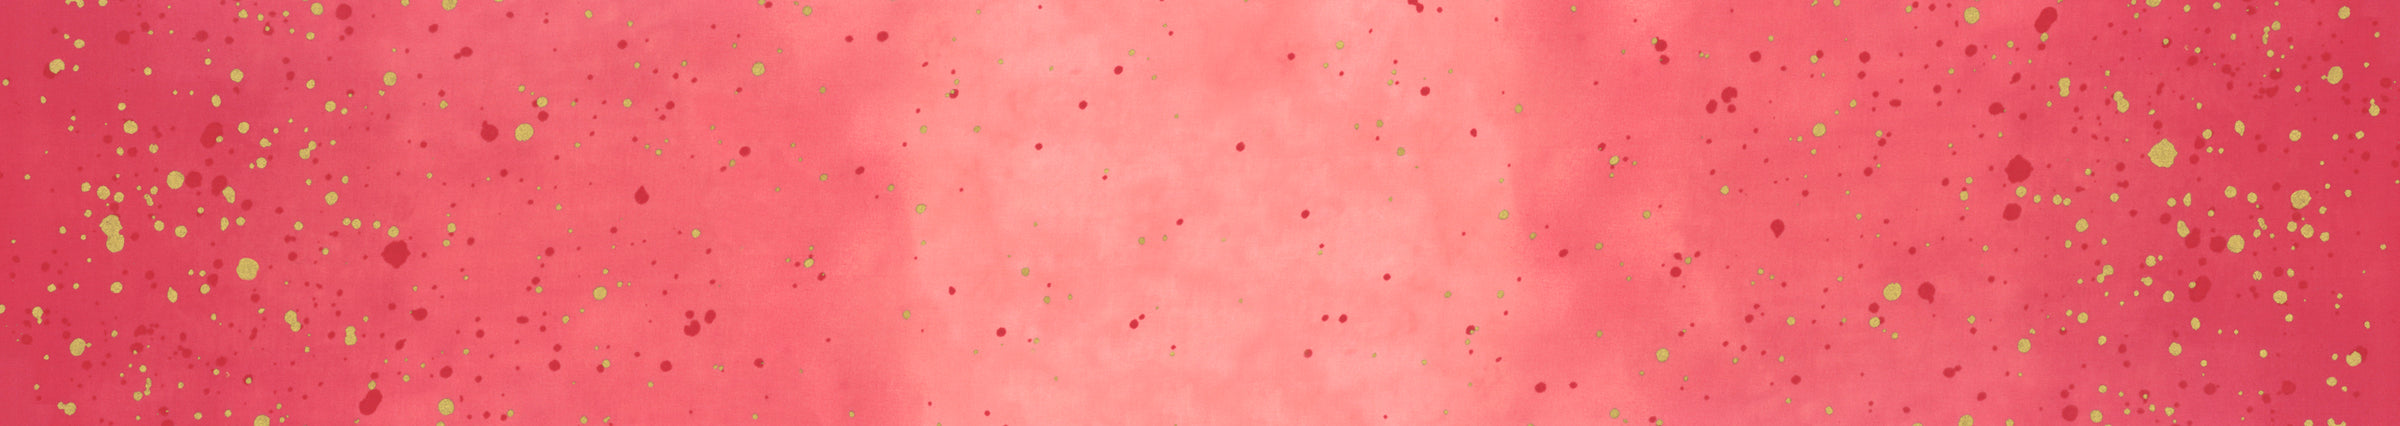 Ombre Galaxy Metallic Quilt Fabric - Hot Pink - 10873 14M